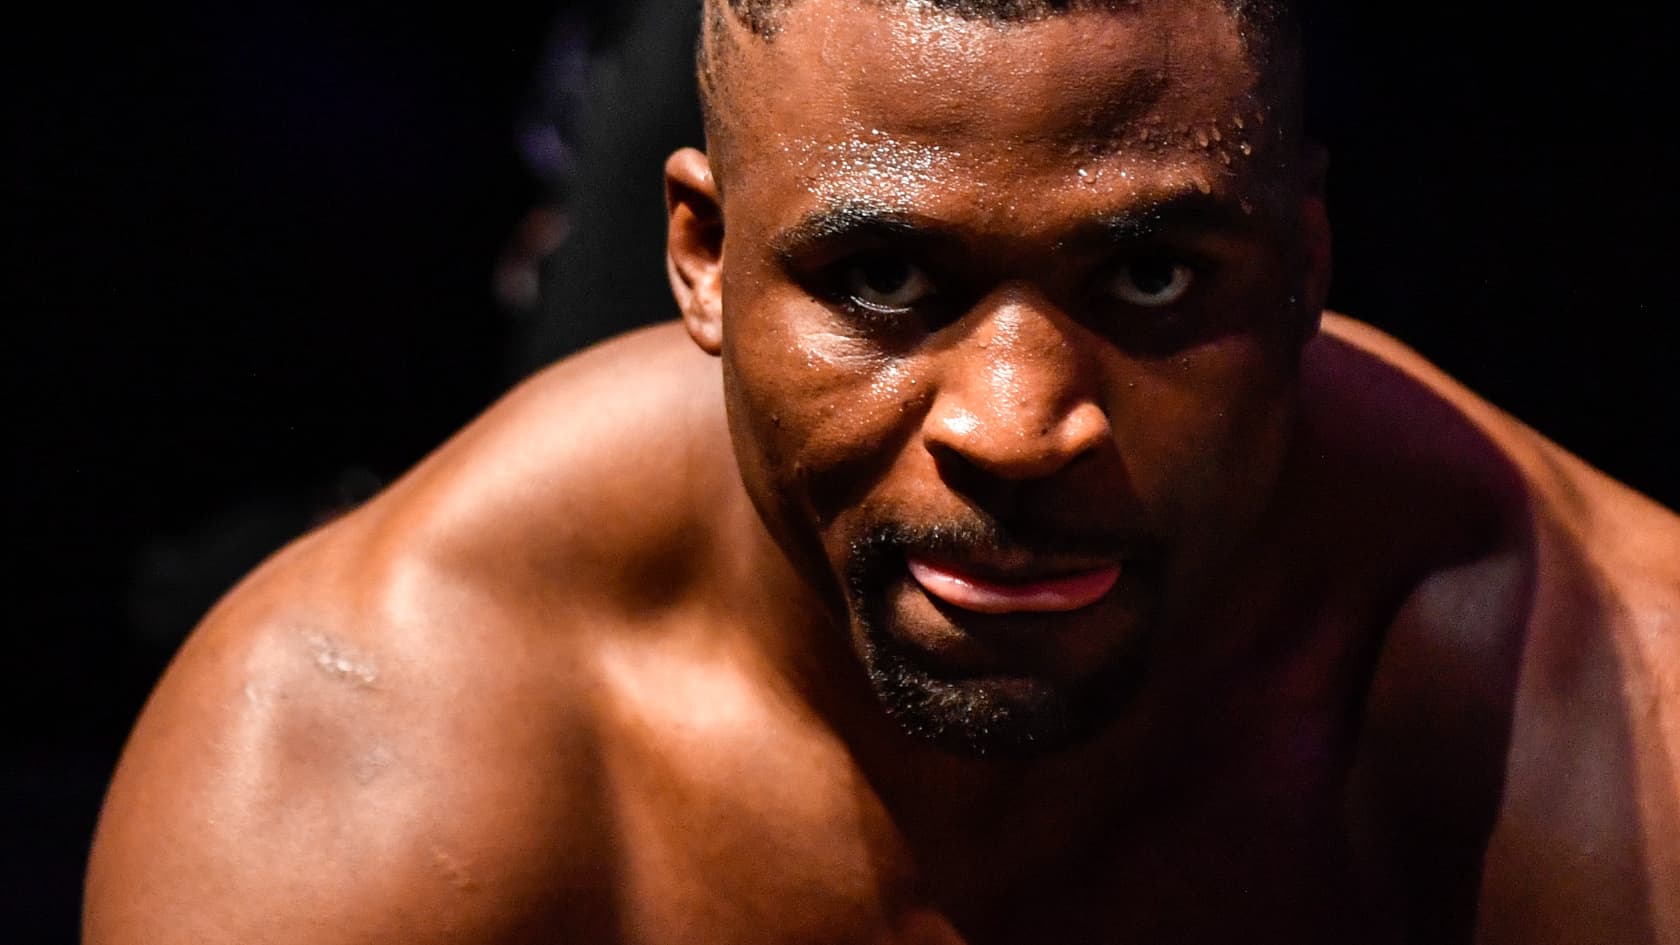 Francis Ngannou’s heartbreaking message after the death of his young son